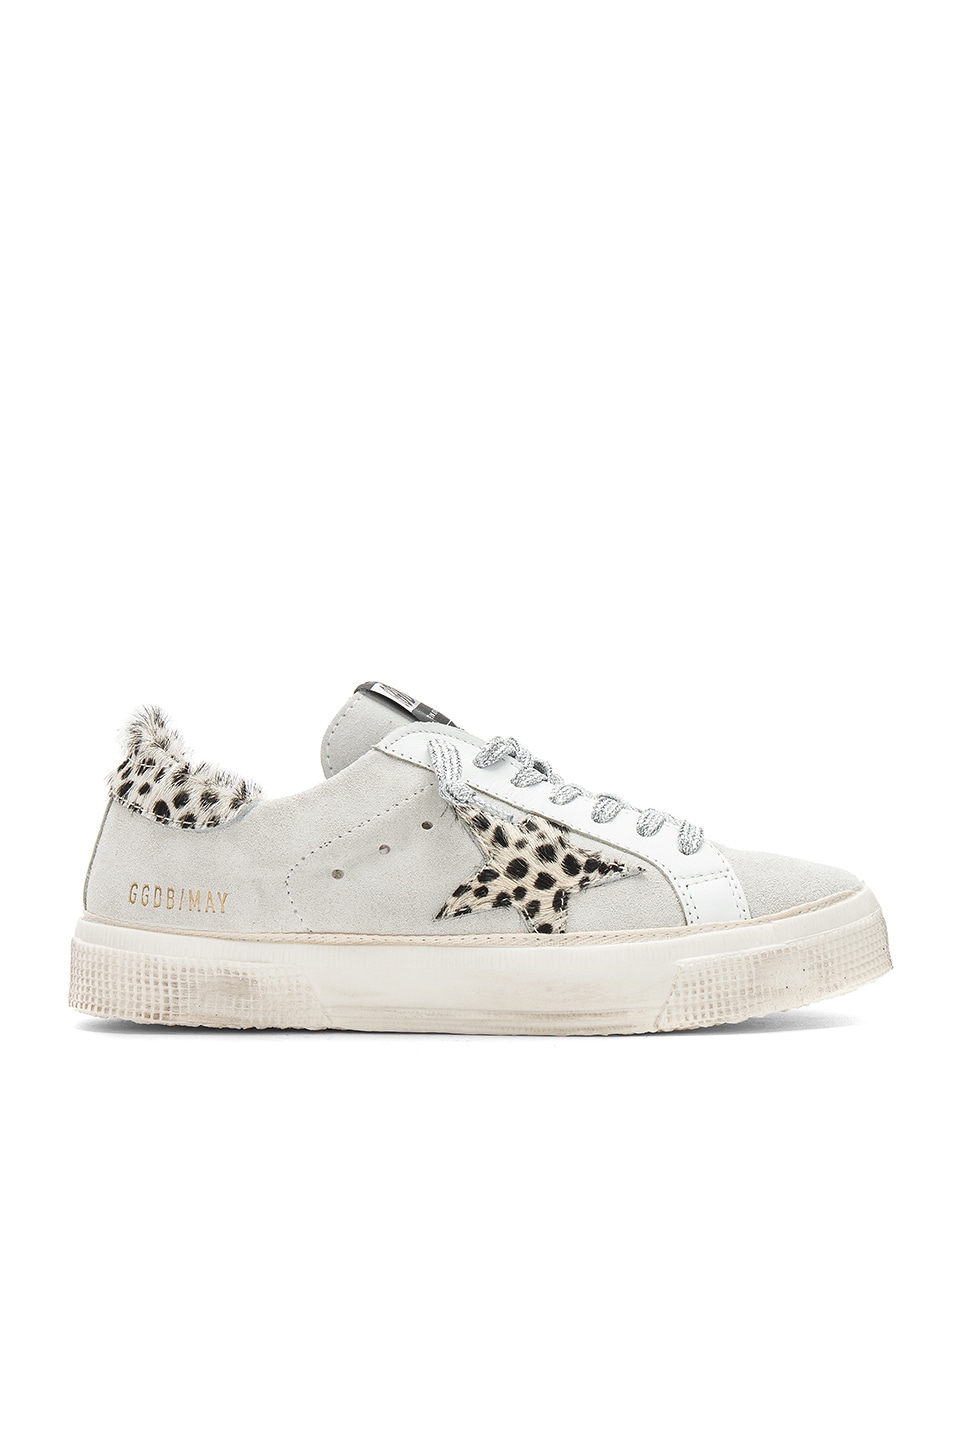 Golden Goose May Sneaker in White Suede & Leopard Star | REVOLVE